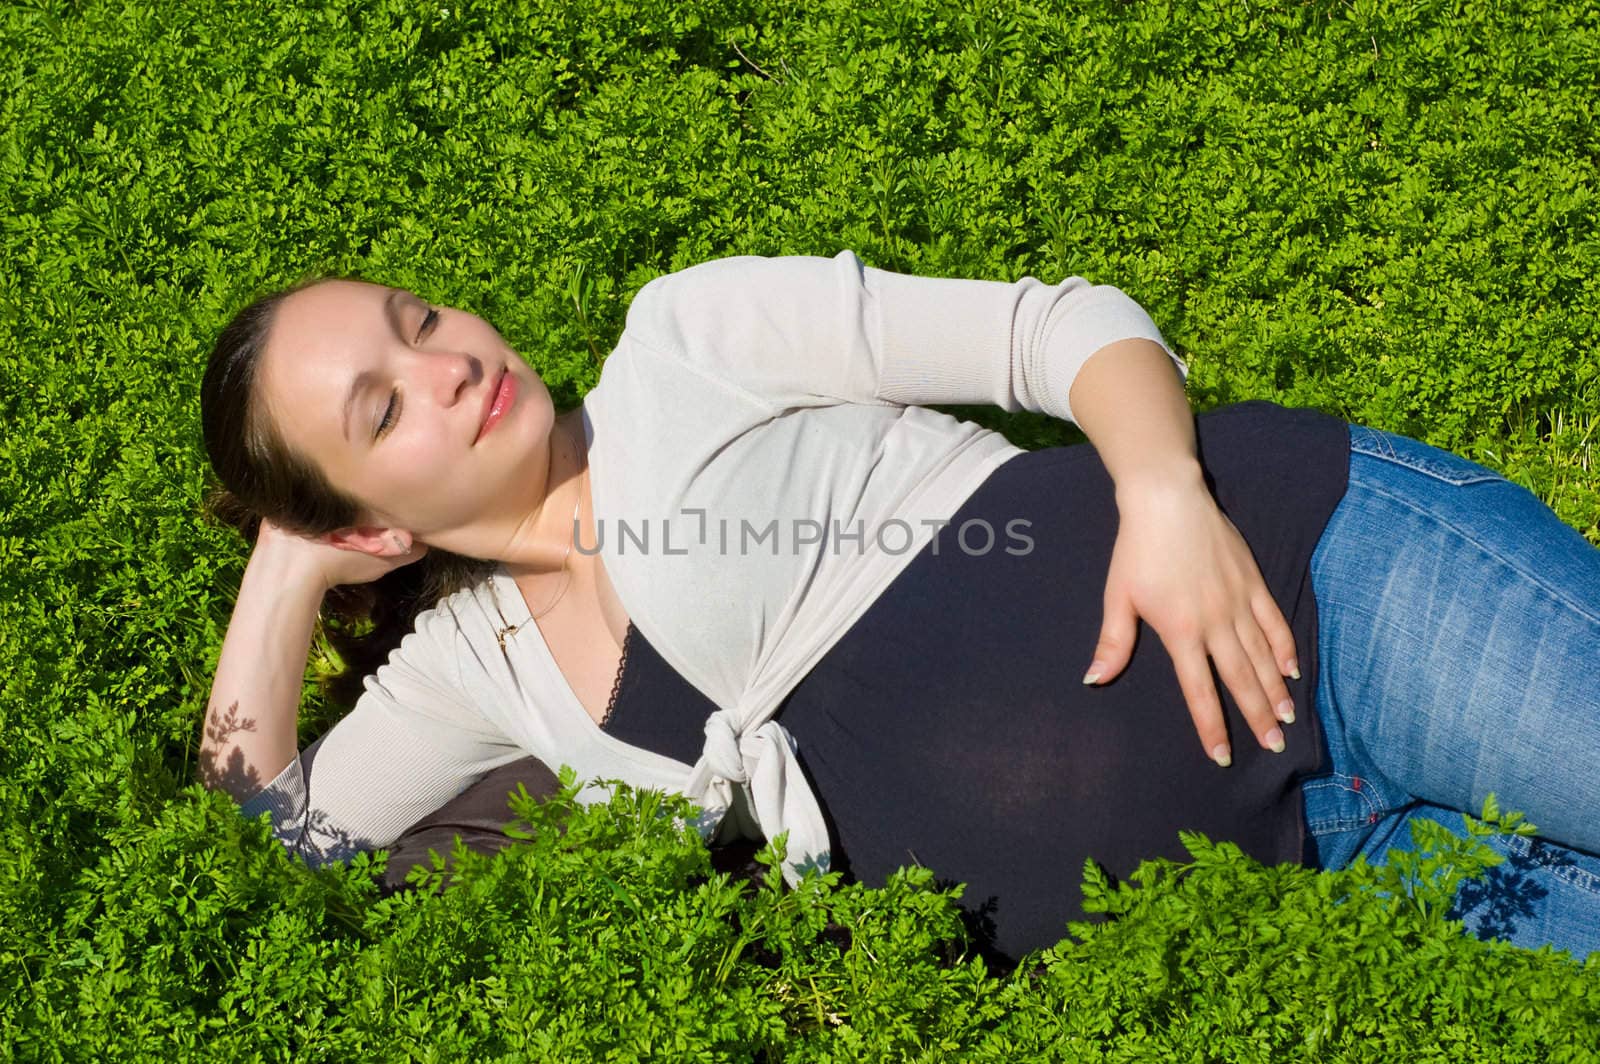 Lying in grass by Angel_a